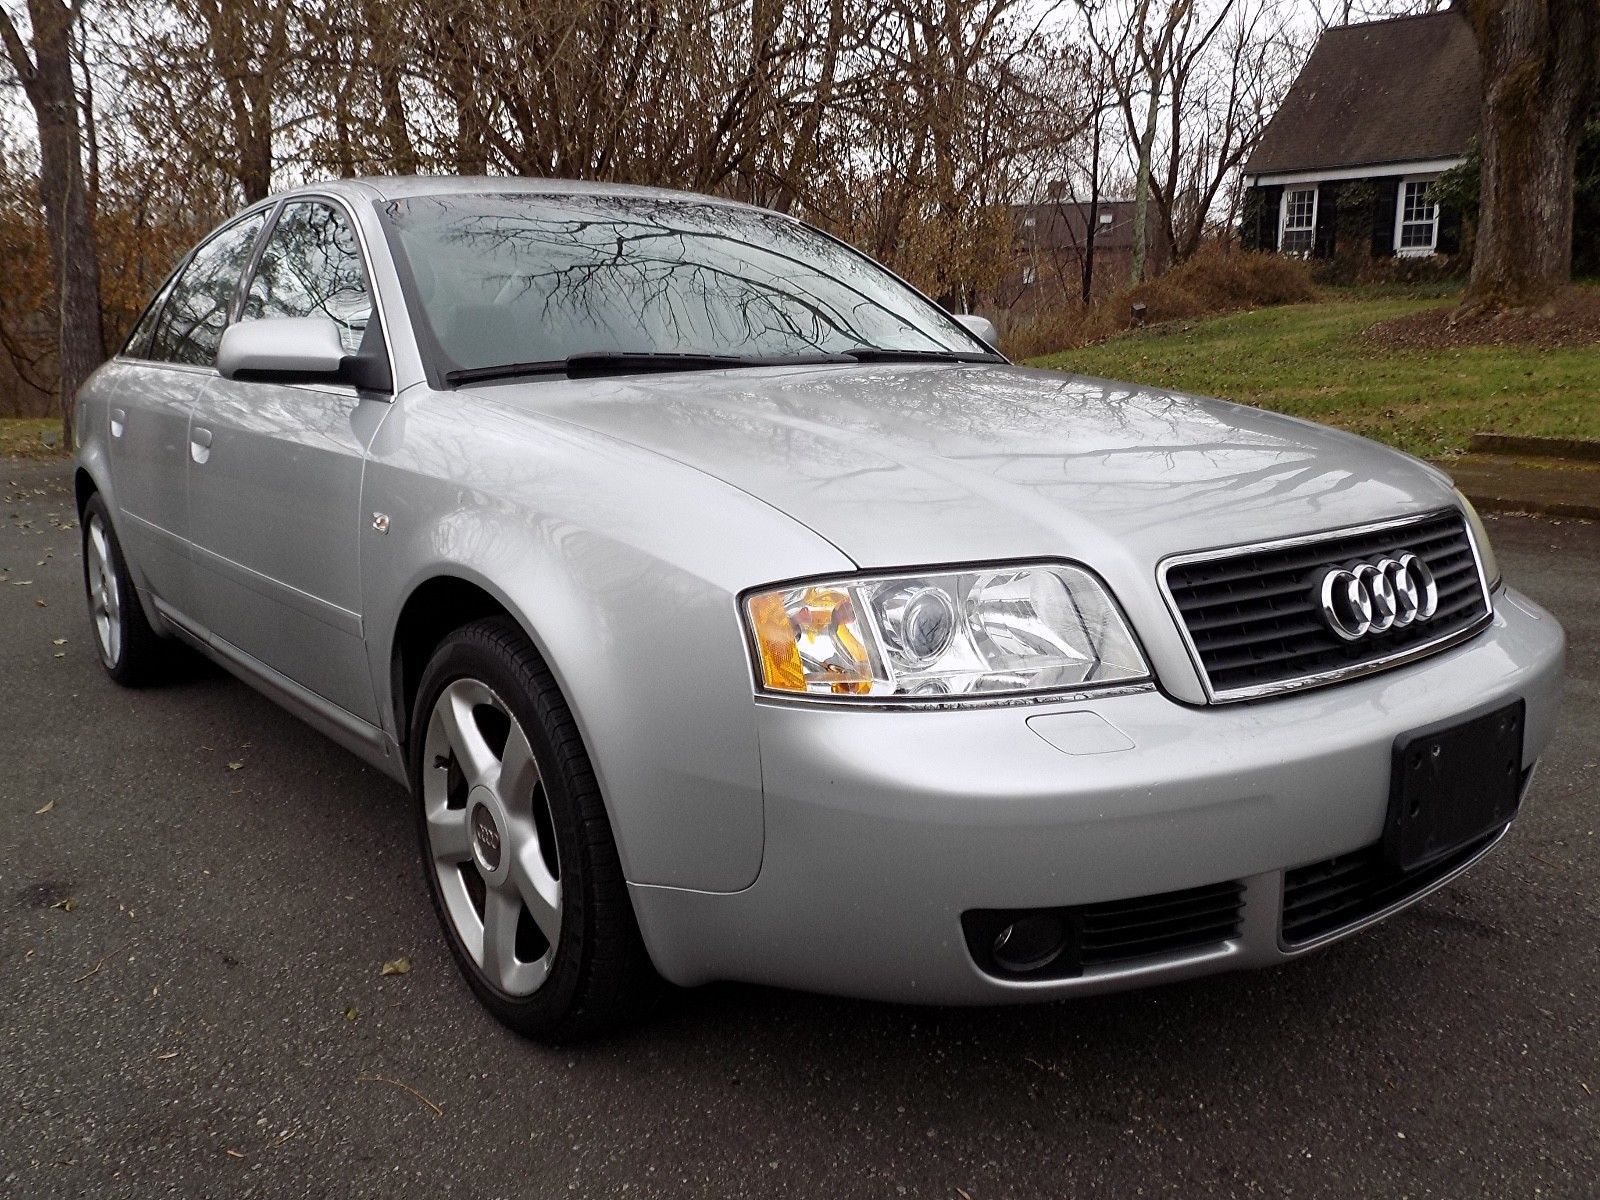 Used 2004 Audi A6 Quattro 4-Door Sedan No Reserve 2004 Audi A6 Quattro  4-Door Sedan 3.0L V6 Auto AWD Leather 95k Miles 2022 2023 is in stock and  for sale - Pric… |